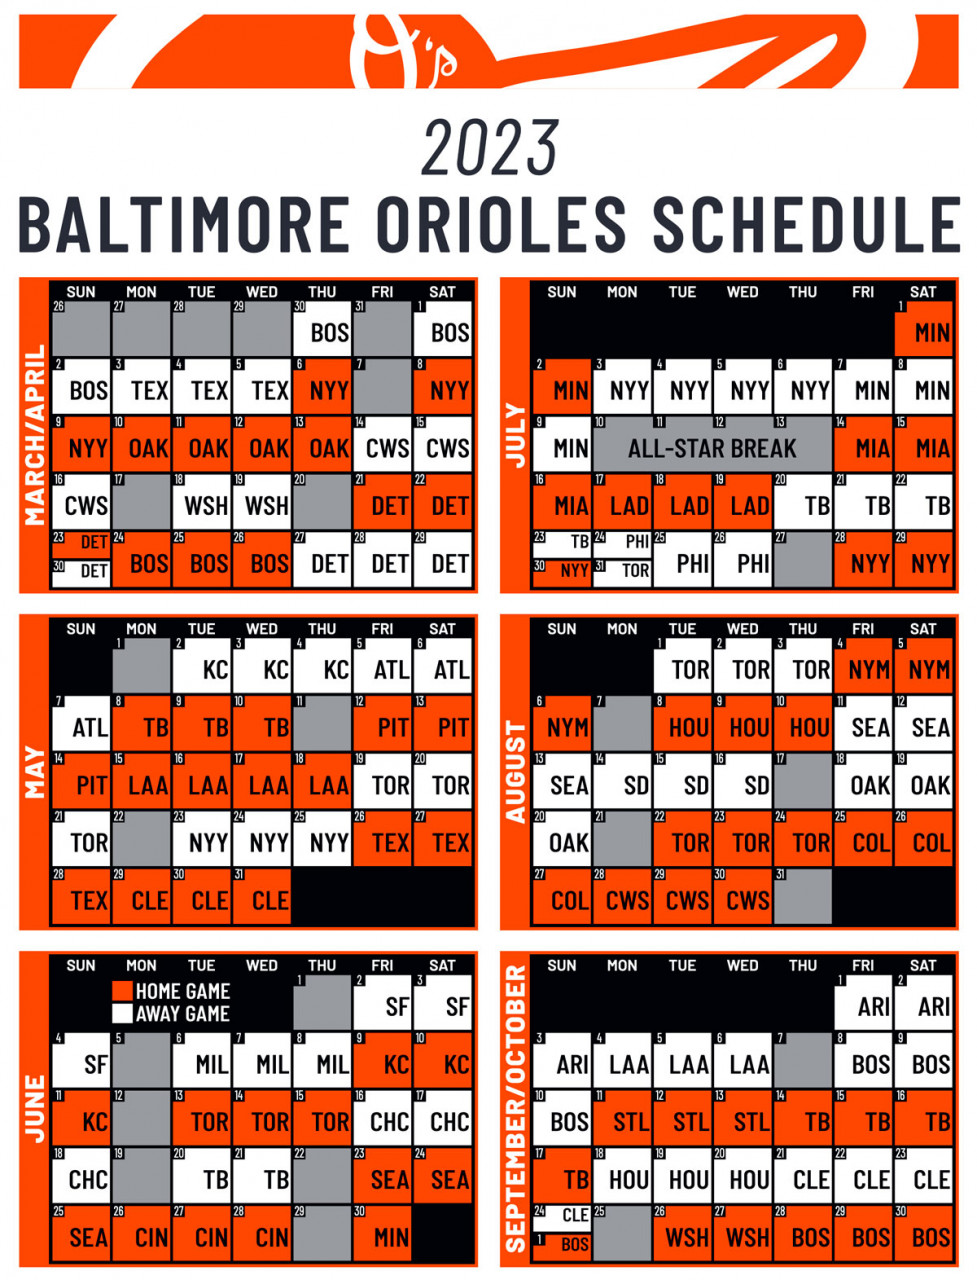 Press release: Orioles announce 2023 promotional schedule